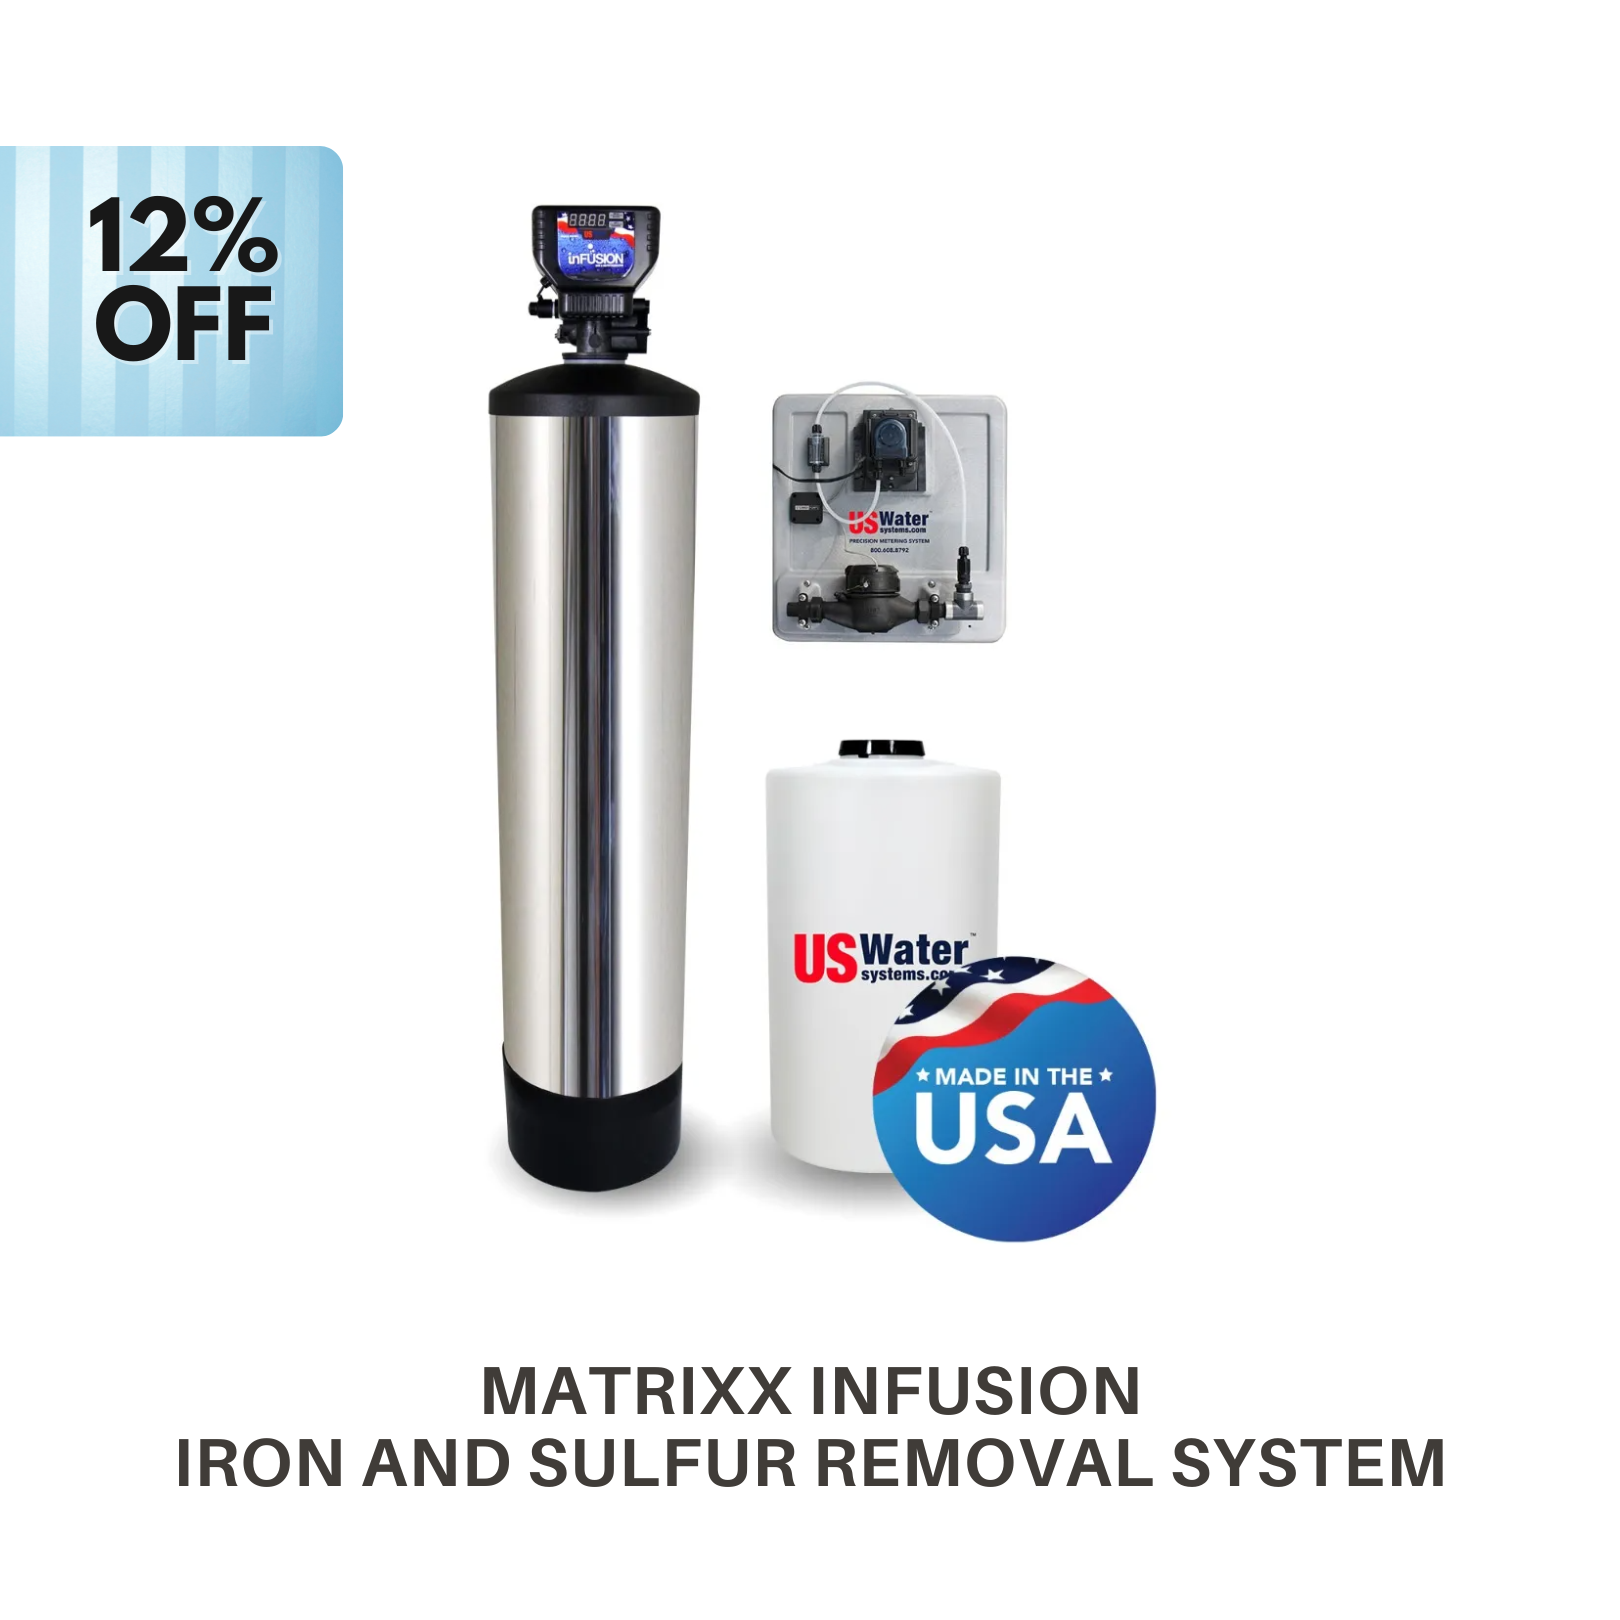 matrixx infusion iron and sulfur removal system for residential water treatment applications by us water systems made in america